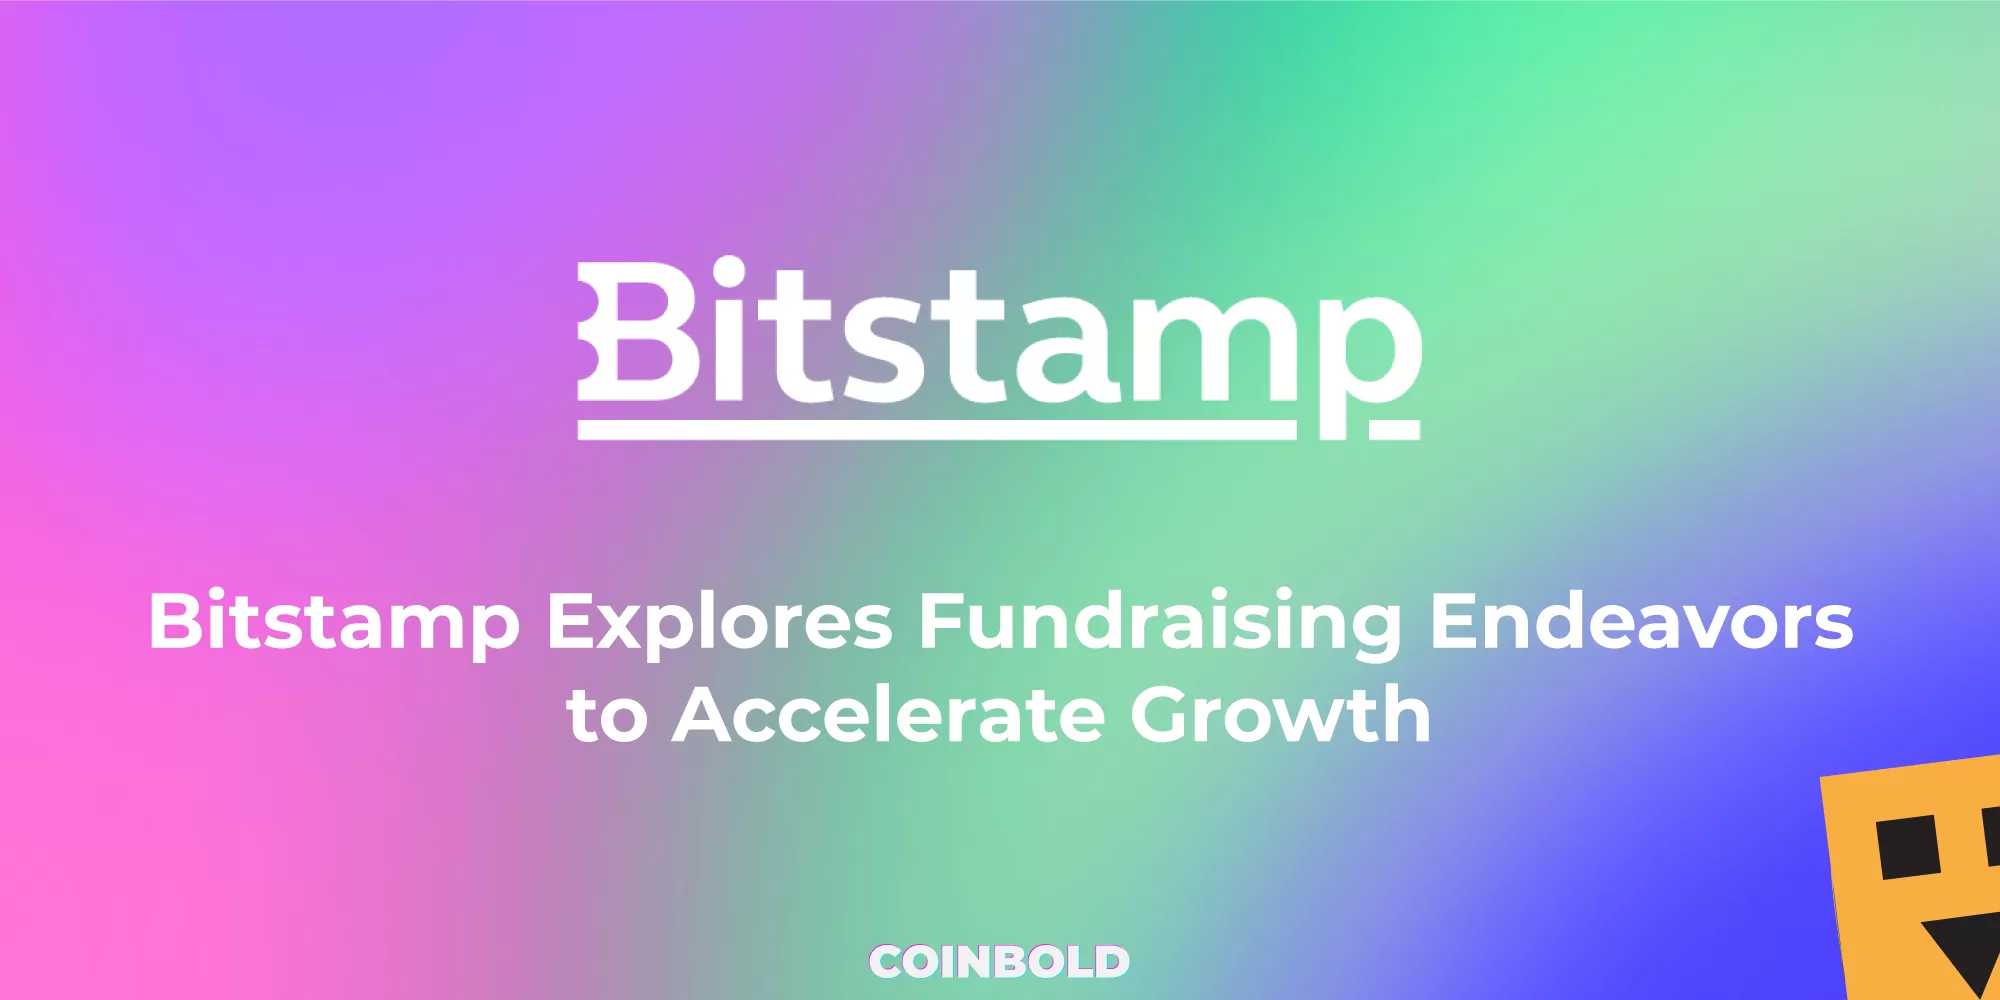 Bitstamp Explores Fundraising Endeavors to Accelerate Growth